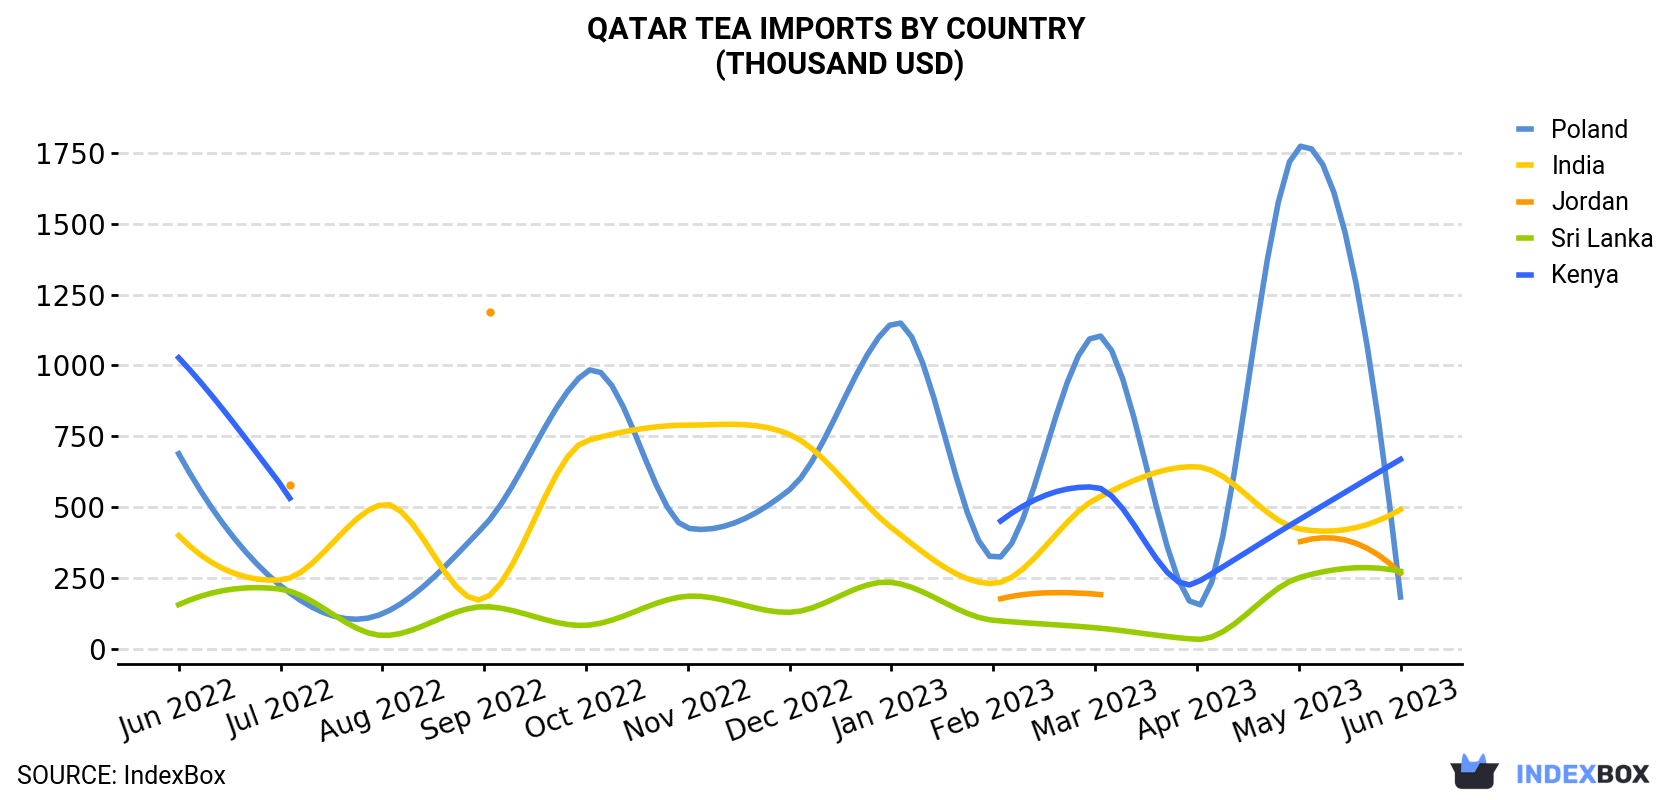 Qatar Tea Imports By Country (Thousand USD)